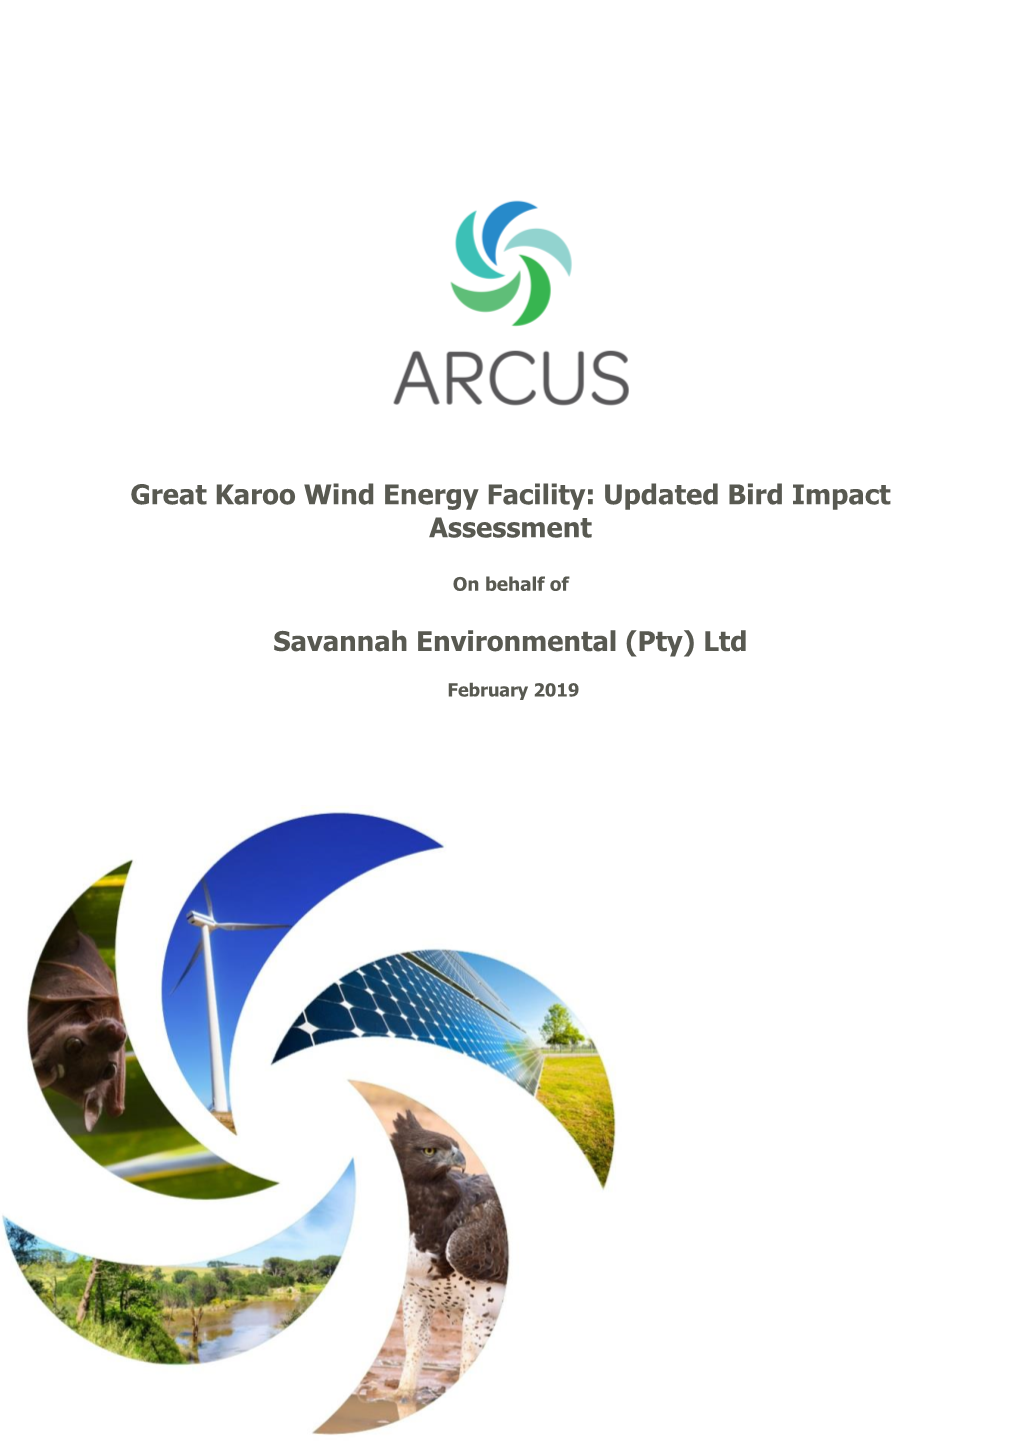 Great Karoo Wind Energy Facility: Updated Bird Impact Assessment